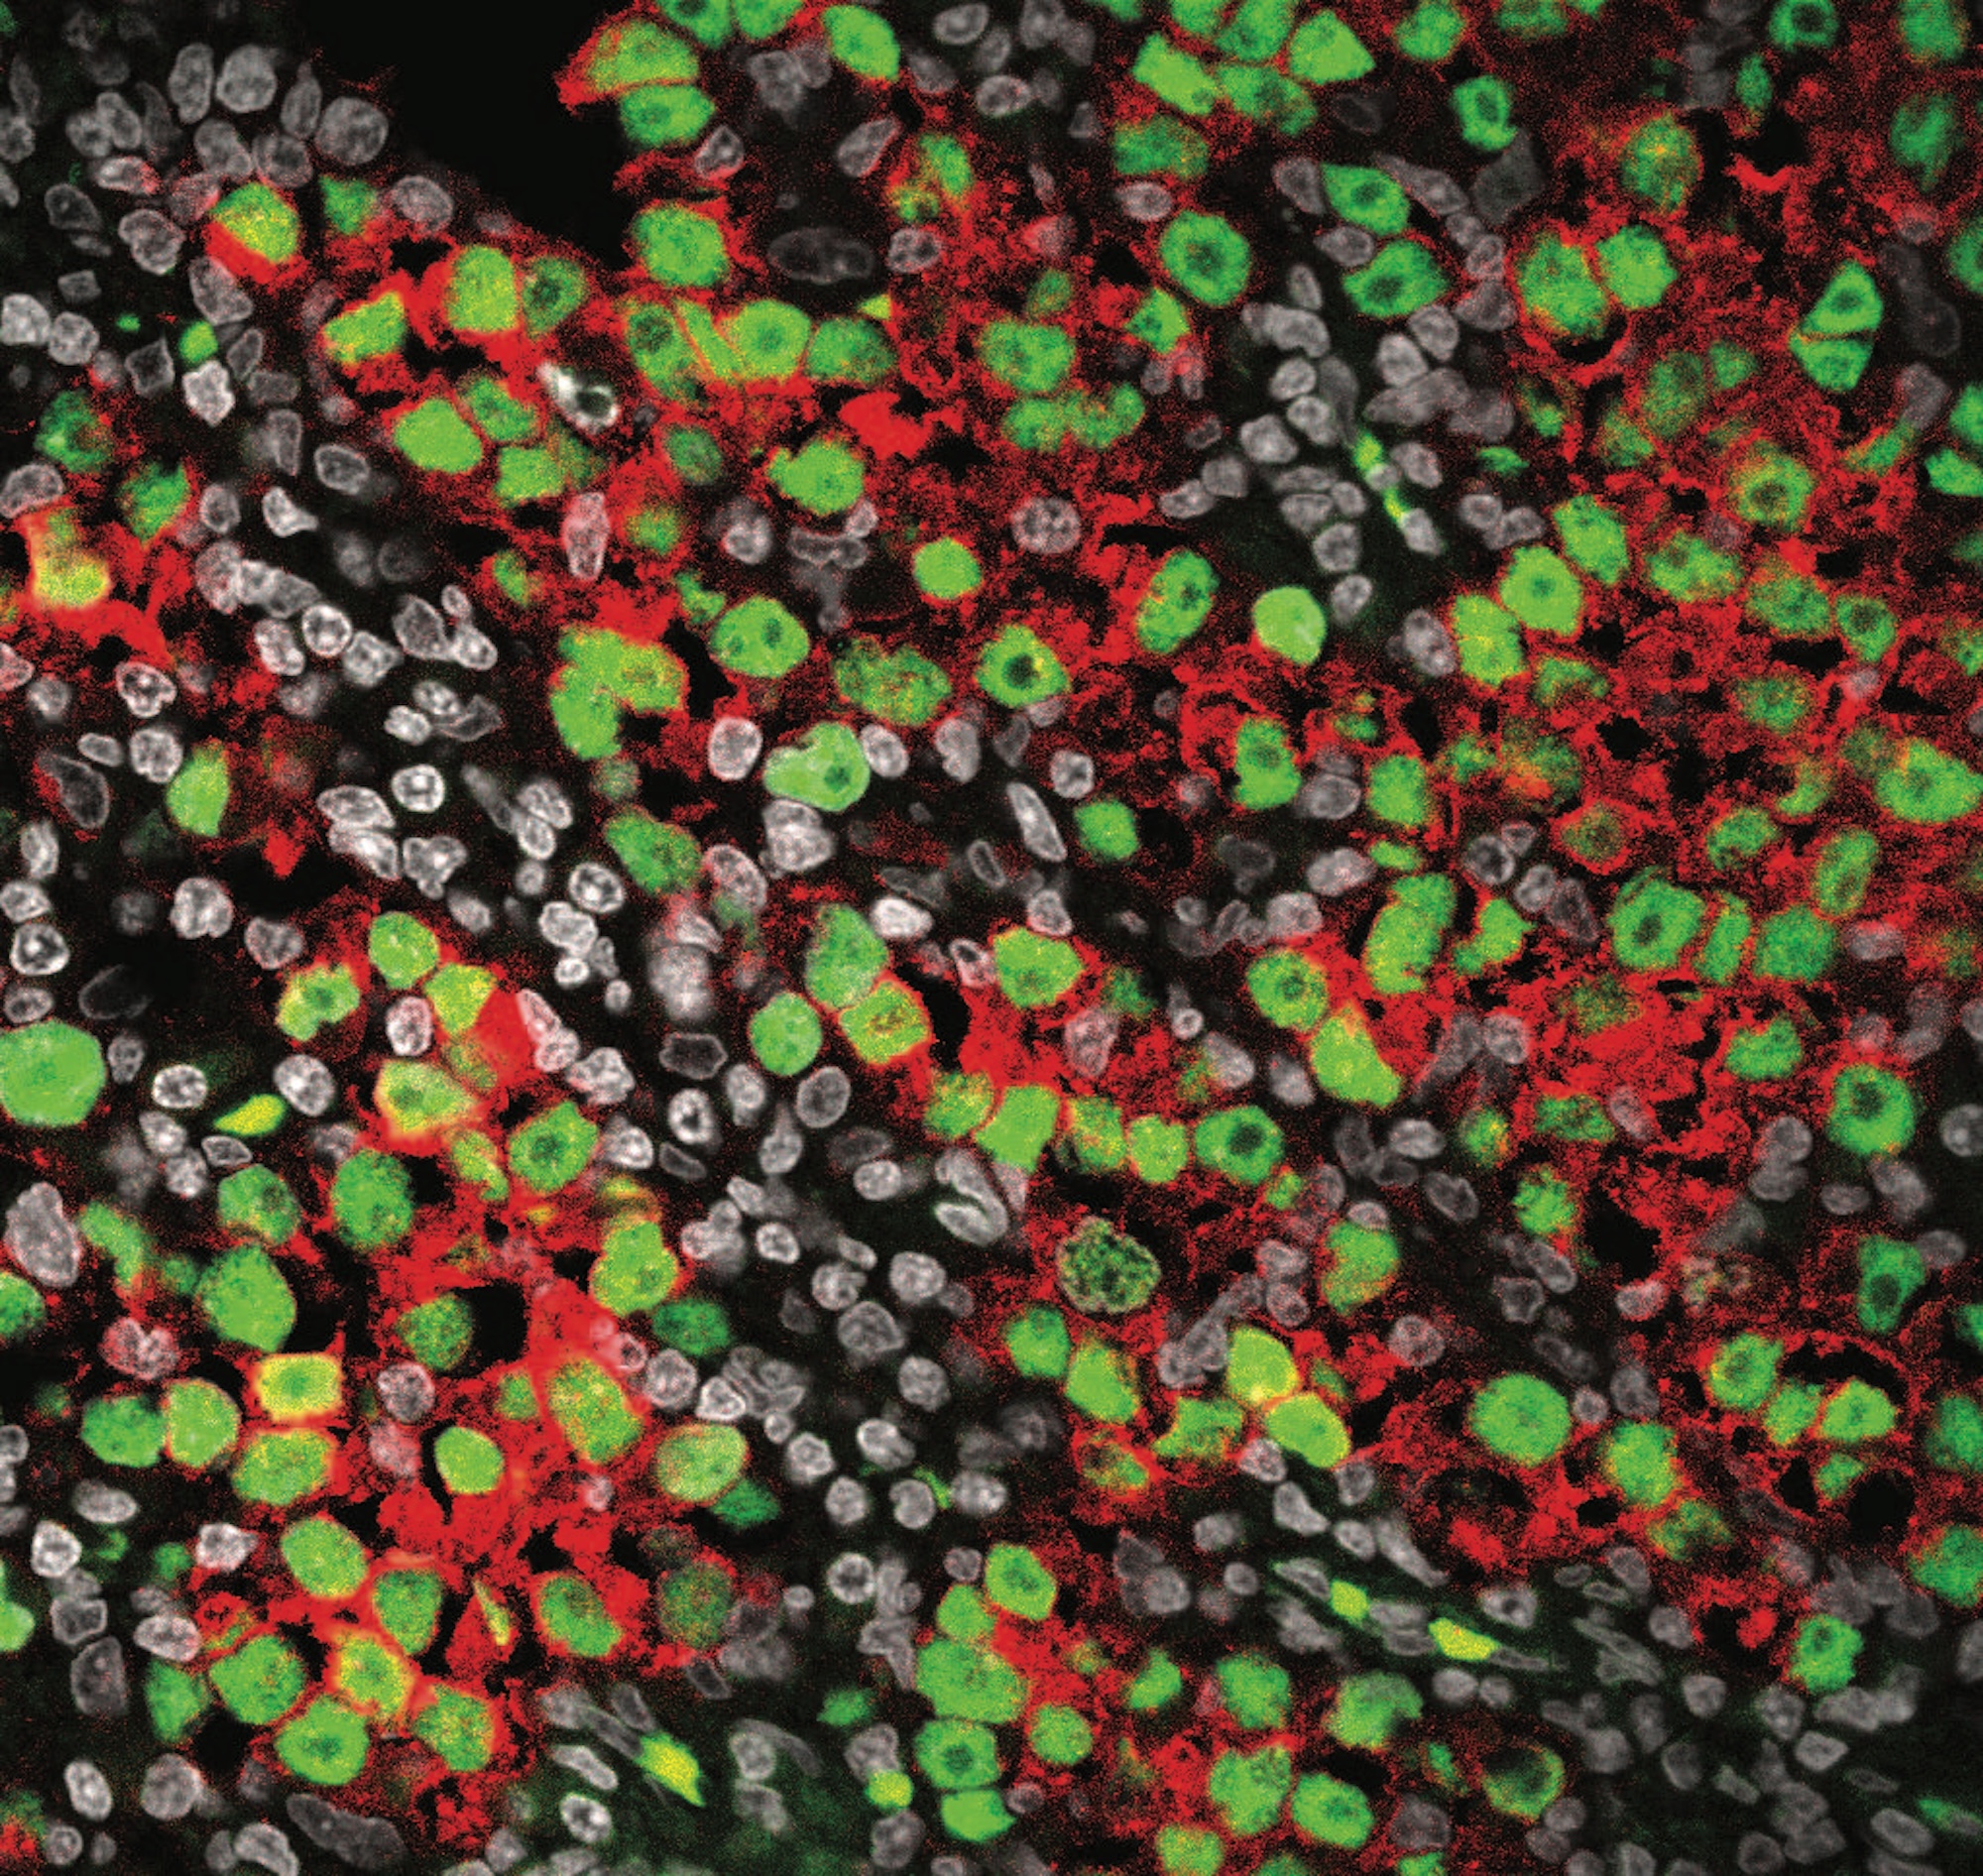 image shows a section of seminoma tissue, a type of testicular cancer. The green color indicates cells that are similar to early-stage germ cells, which are the cells that develop into sperm. The red color highlights areas with high activity of specific genes linked to cancer growth. The gray cells are the nuclei of all the cells in the tissue.